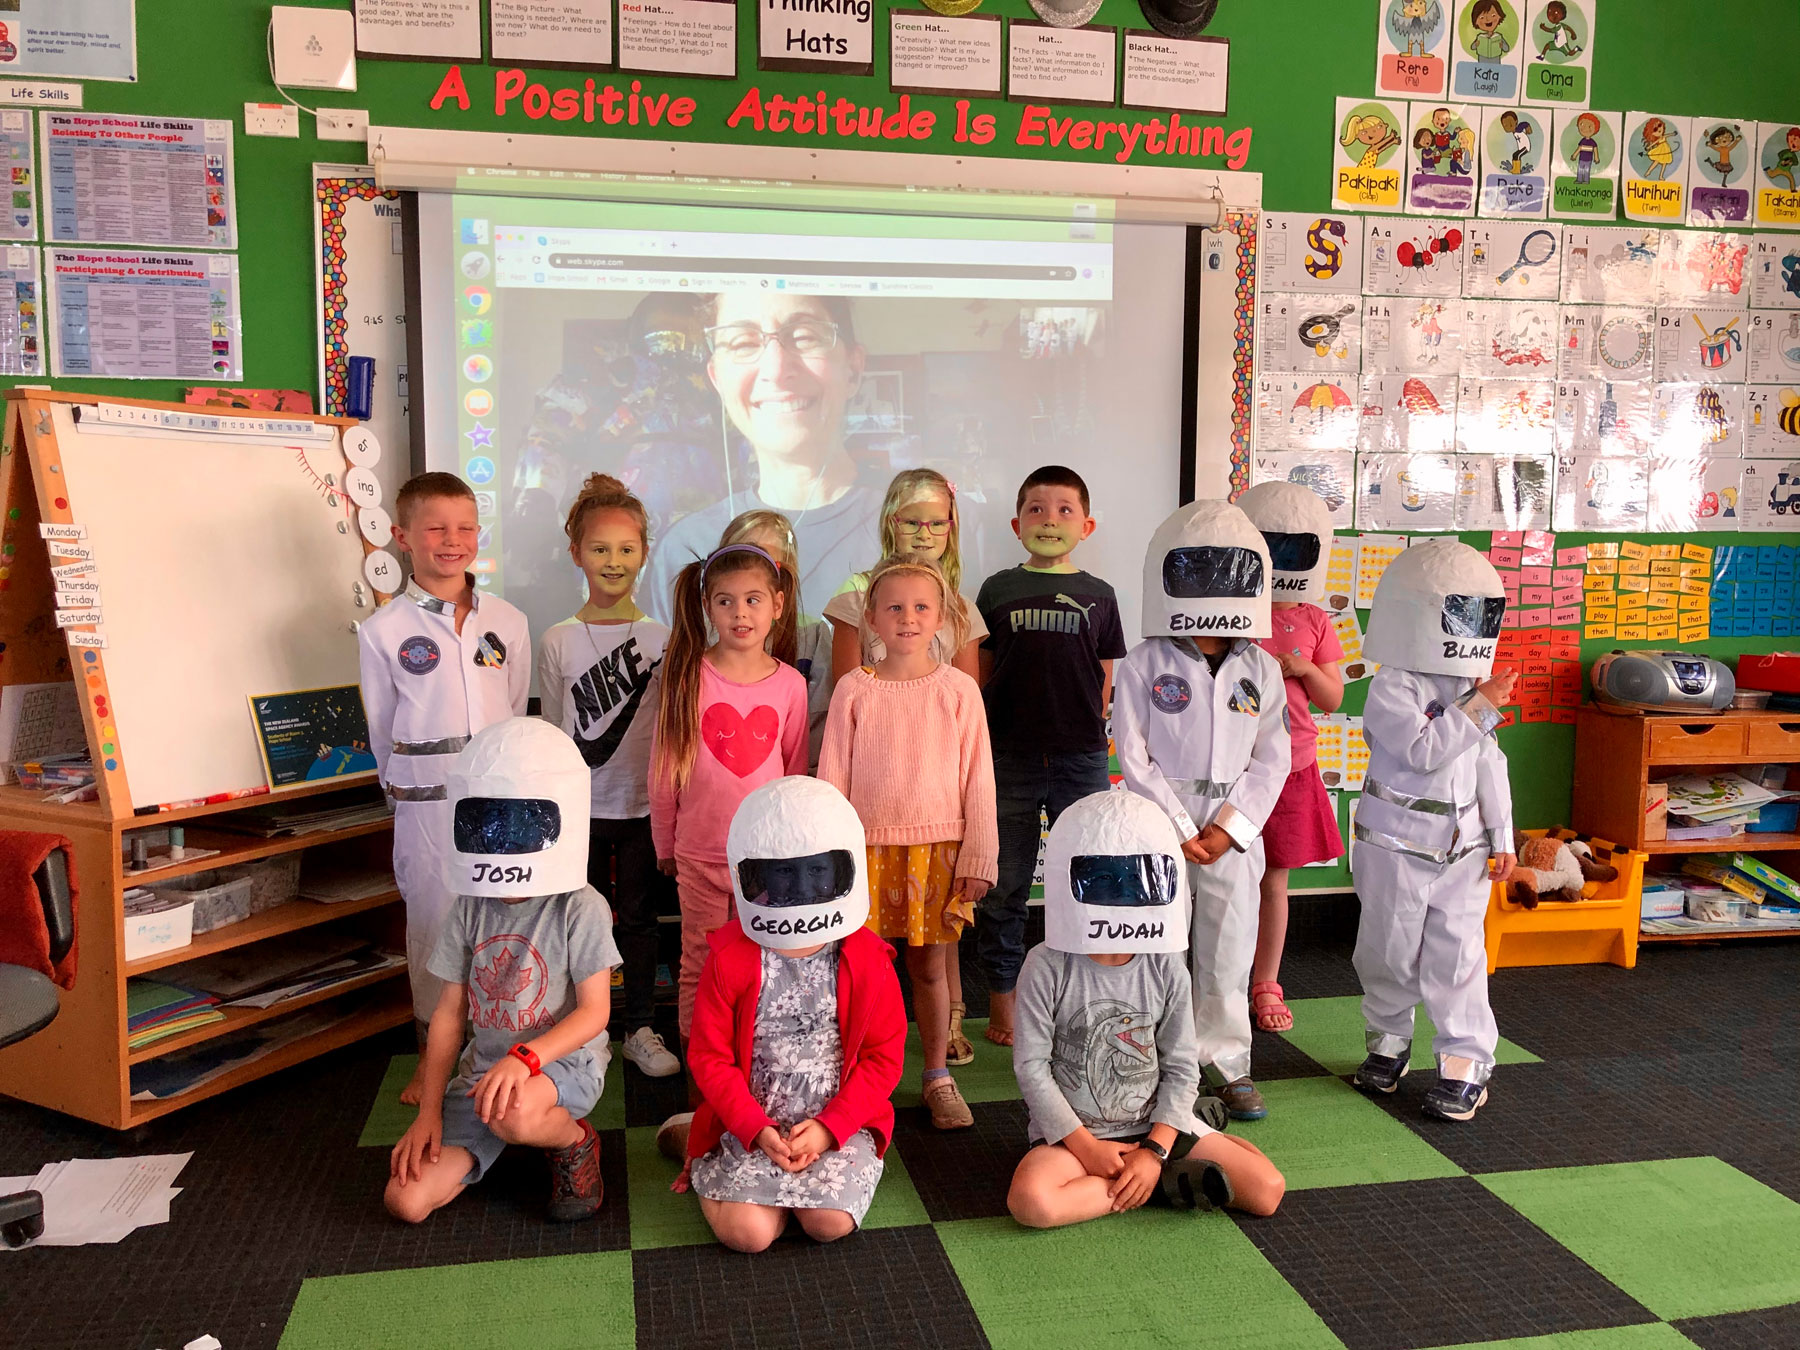 The young space travellers of Room 3 at Hope School stand in front of their live video chat with Nicole Stott, former NASA Astronaut.